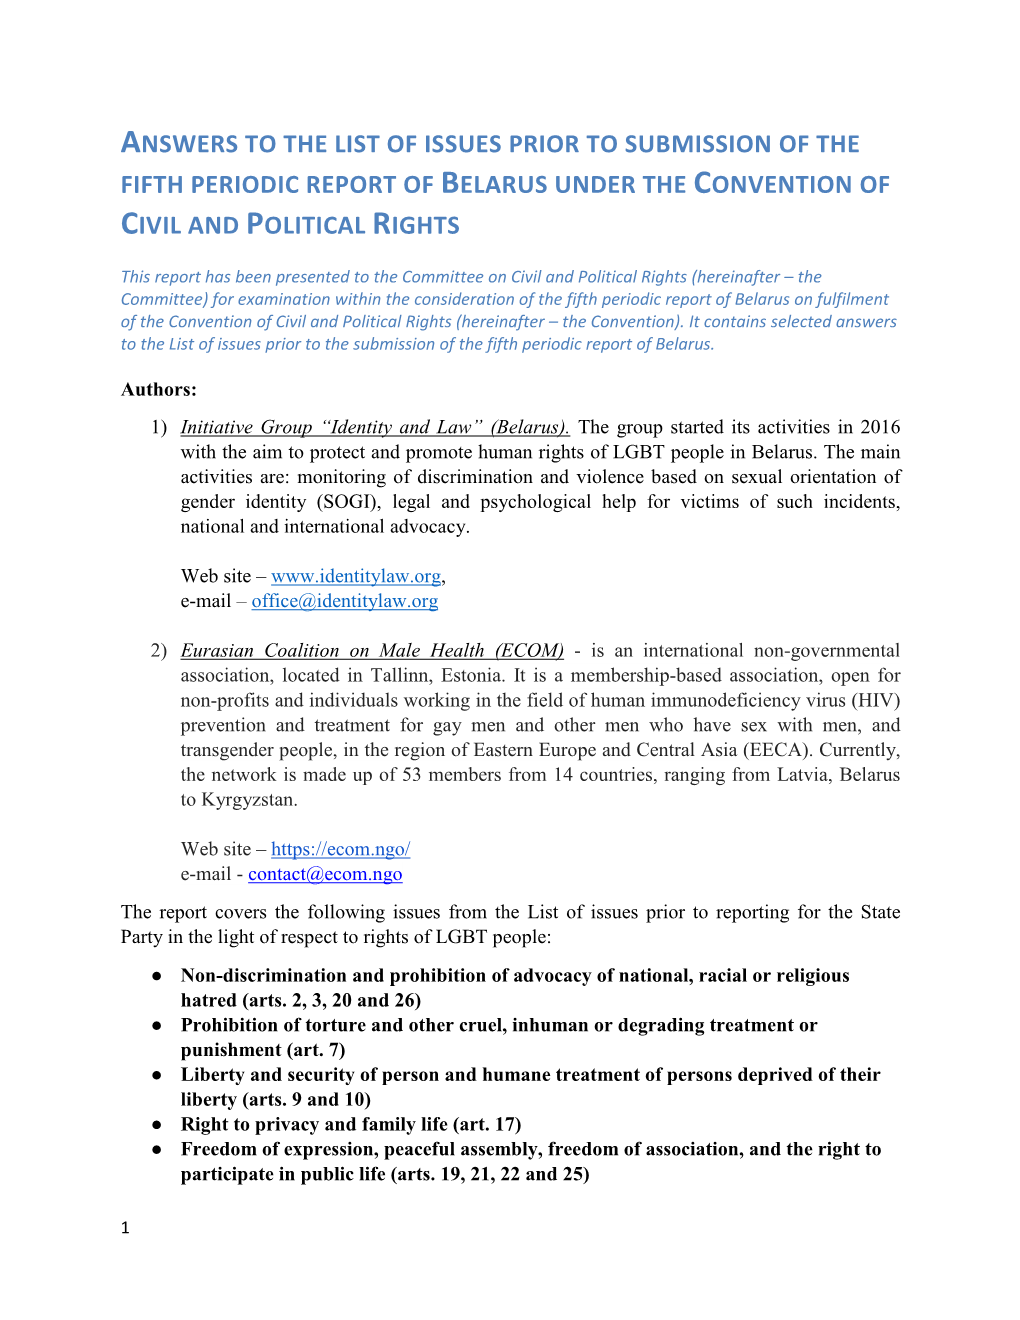 Answers to the List of Issues Prior to Submission of the Fifth Periodic Report of Belarus Under the Convention of Civil and Political Rights